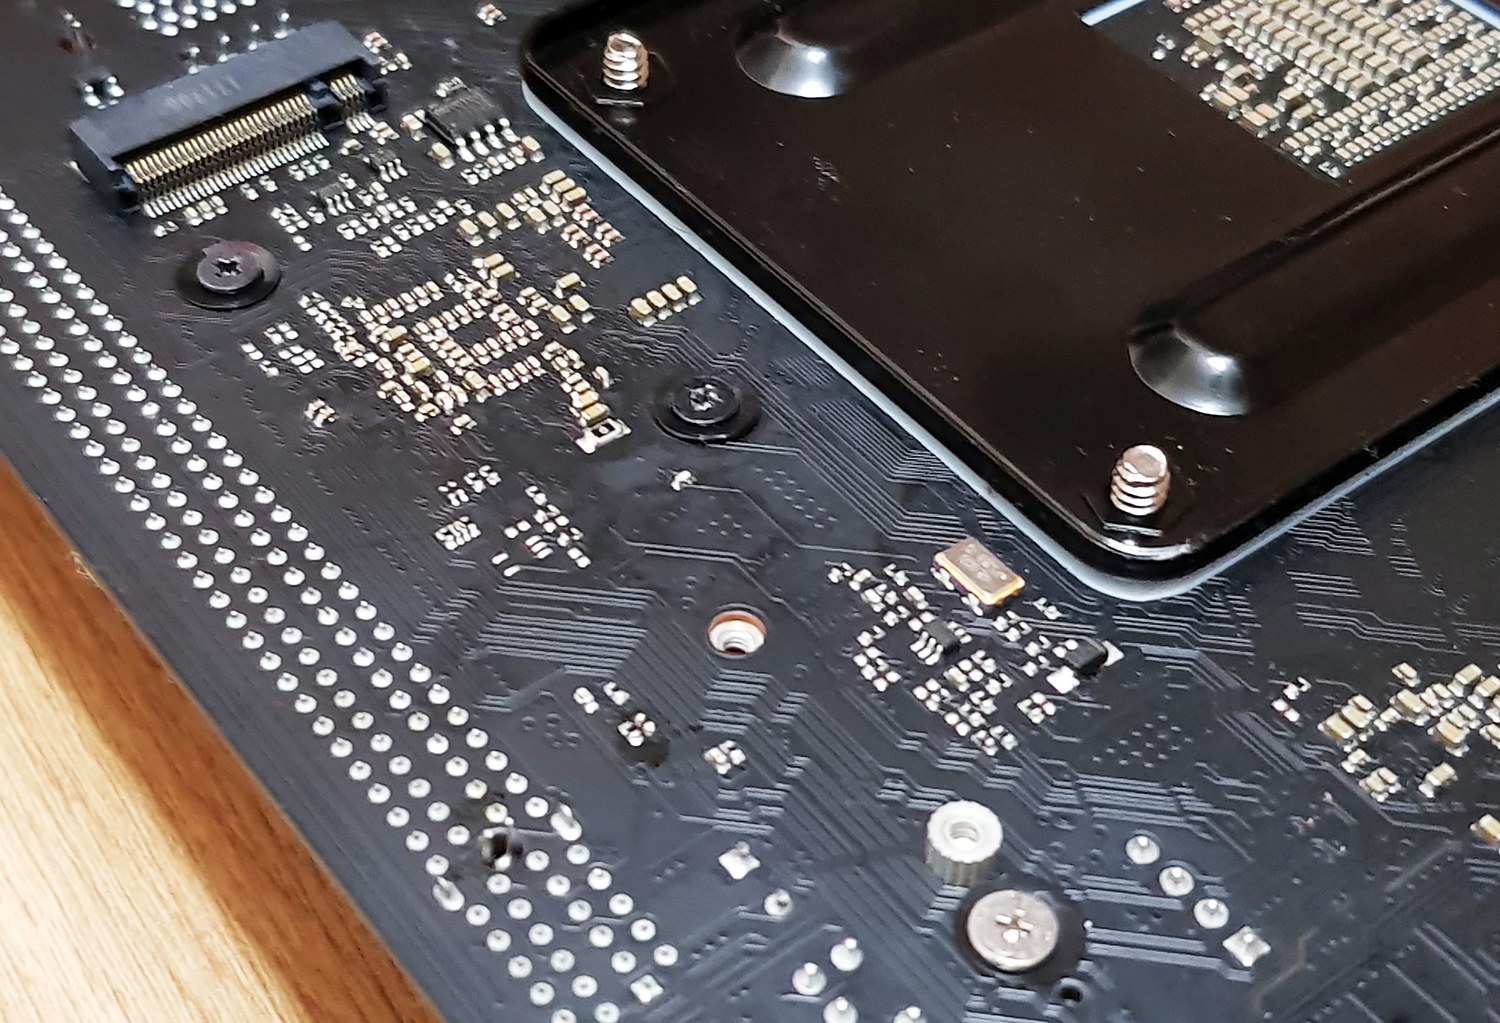 titel Bøje Sudan Board Features And Visual Inspection - The ASRock X370 Gaming-ITX/ac  Motherboard Review